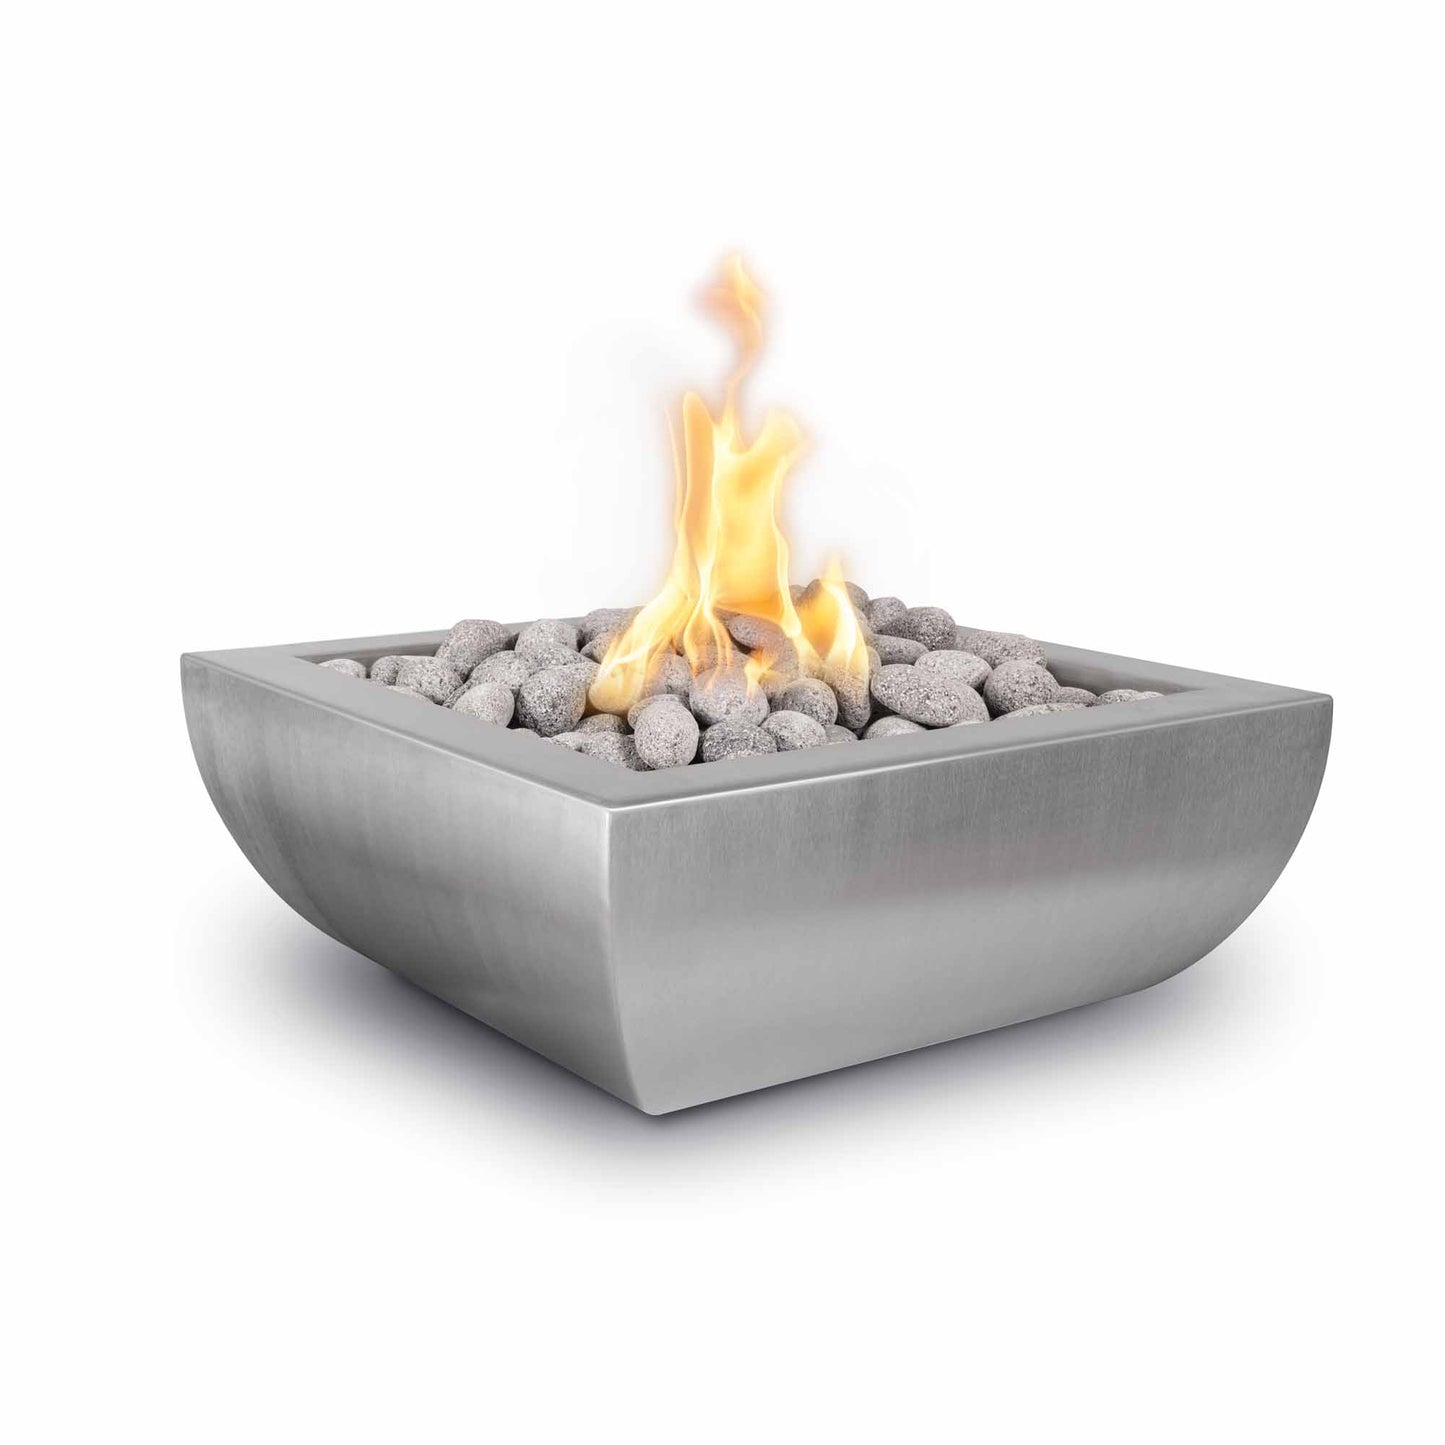 Avalon Stainless Steel Fire Bowl - 36" - Electronic Ignition